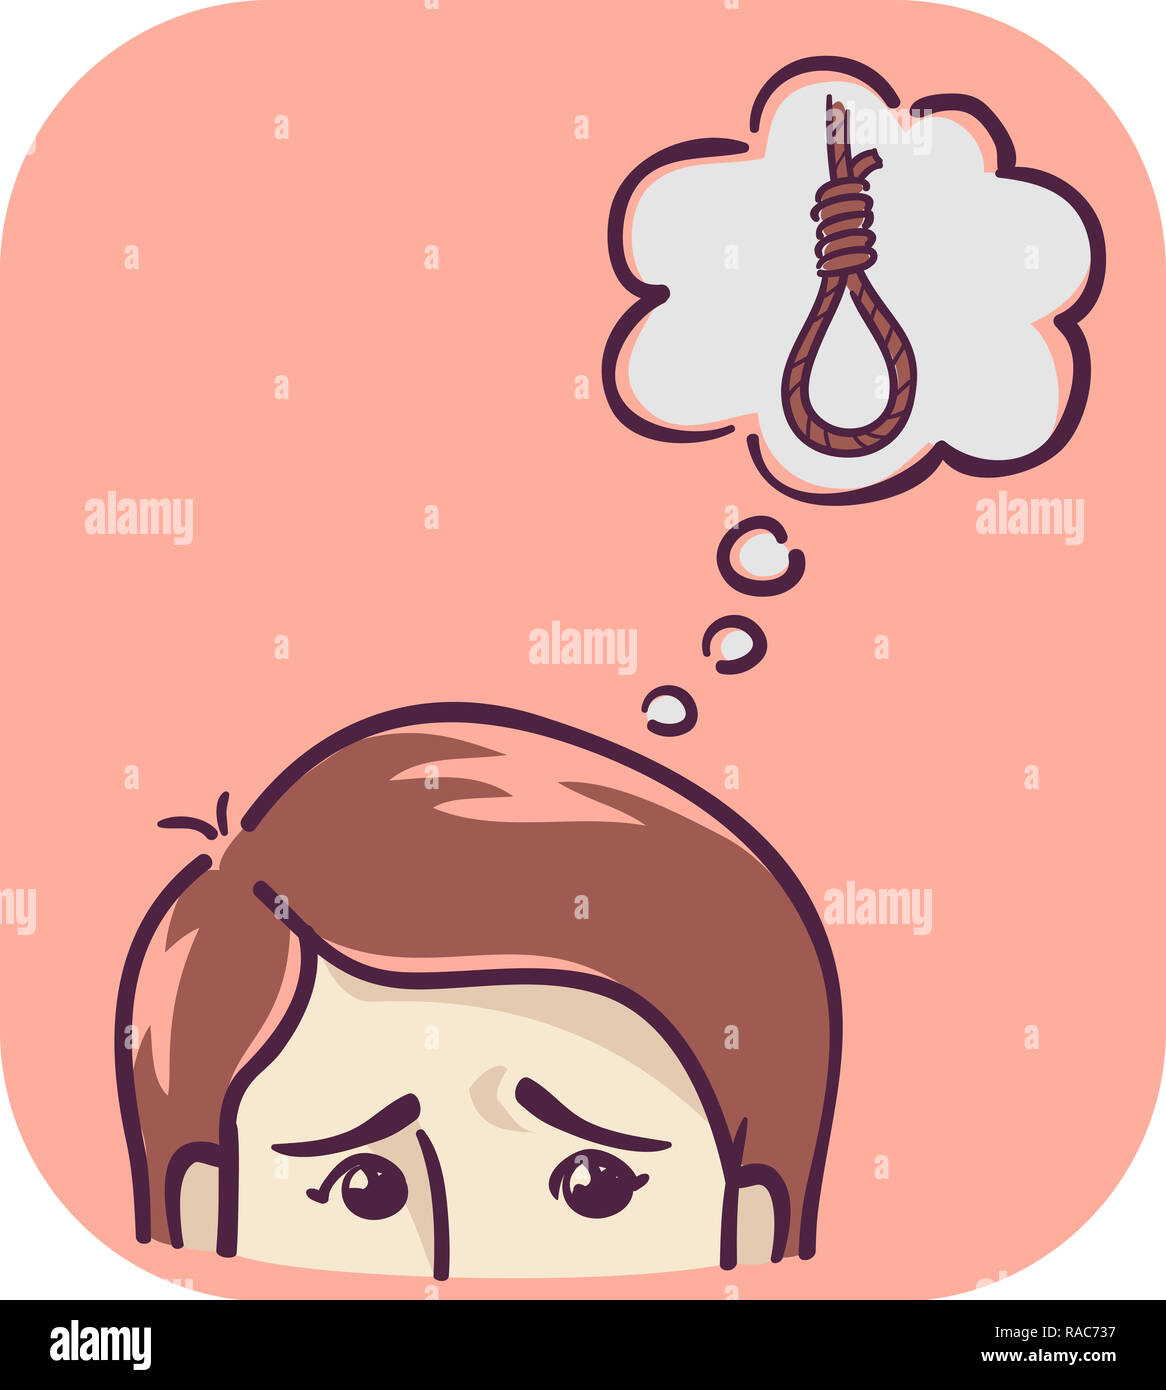 Illustration of a Man or a Woman Thinking About Own Death by Hanging Stock Photo